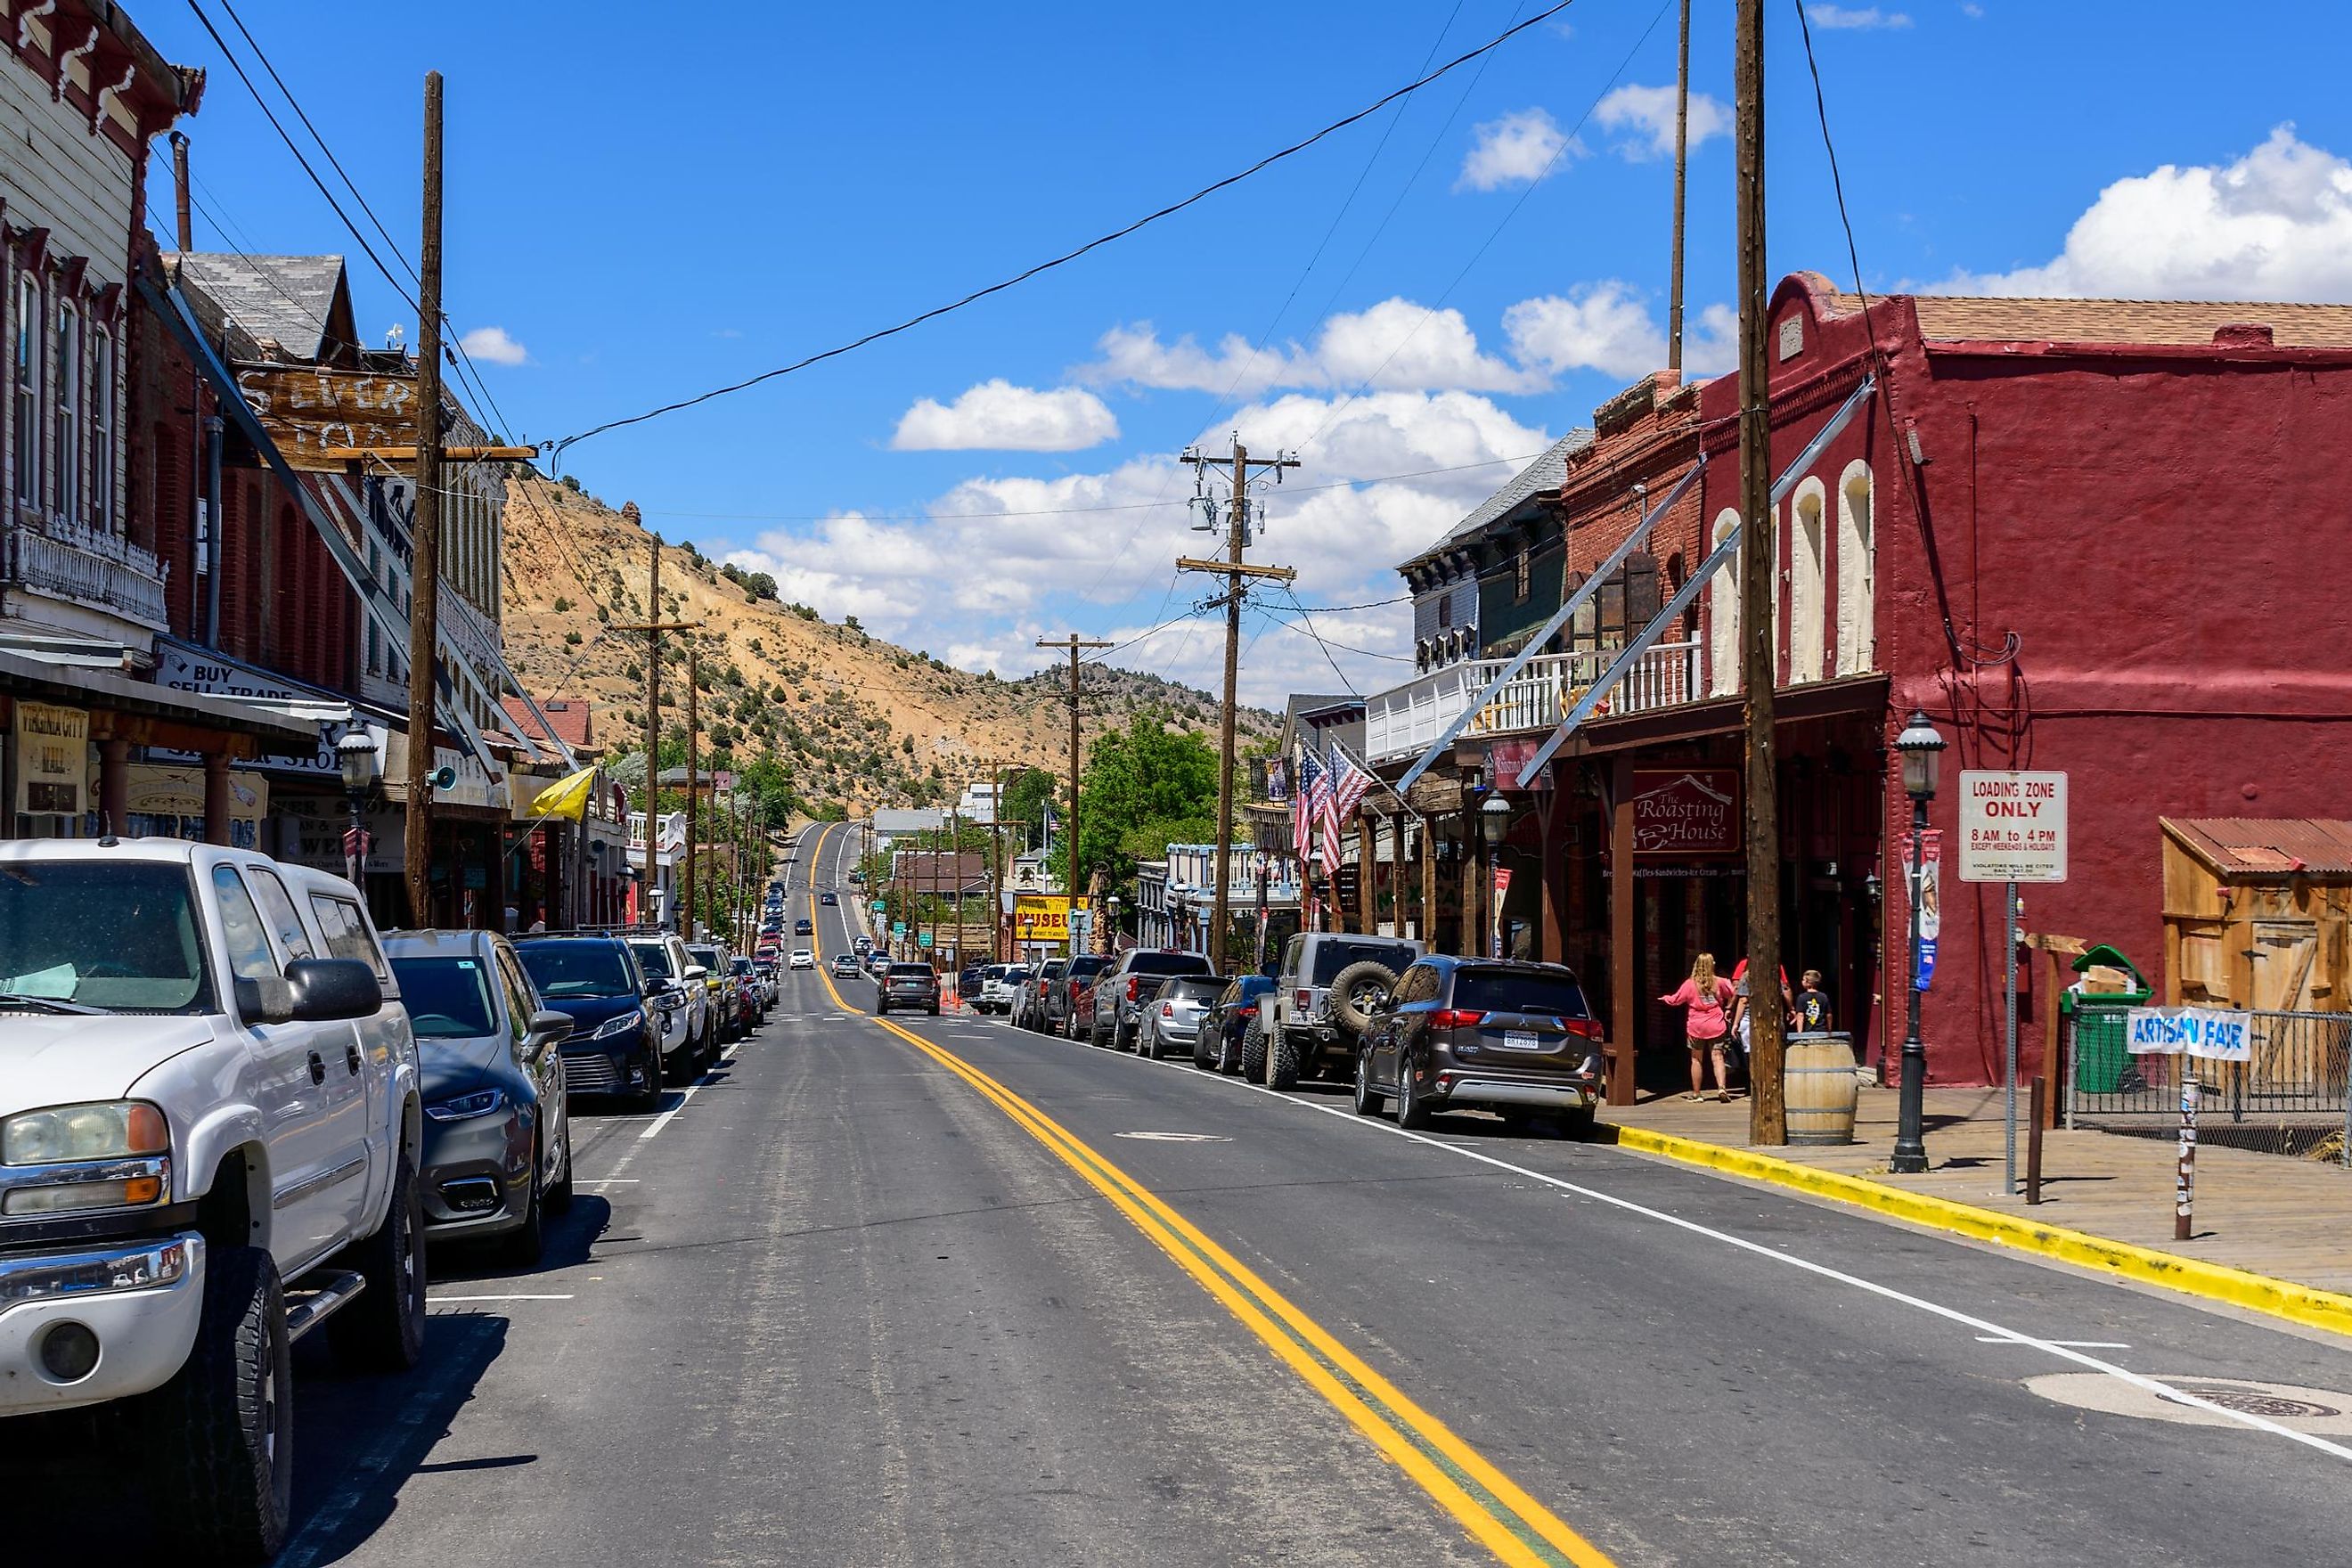 Scenic view of Victorian building on historic Main Street in downtown Virginia City, Nevada, with parked cars. Editorial credit: Michael Vi / Shutterstock.com